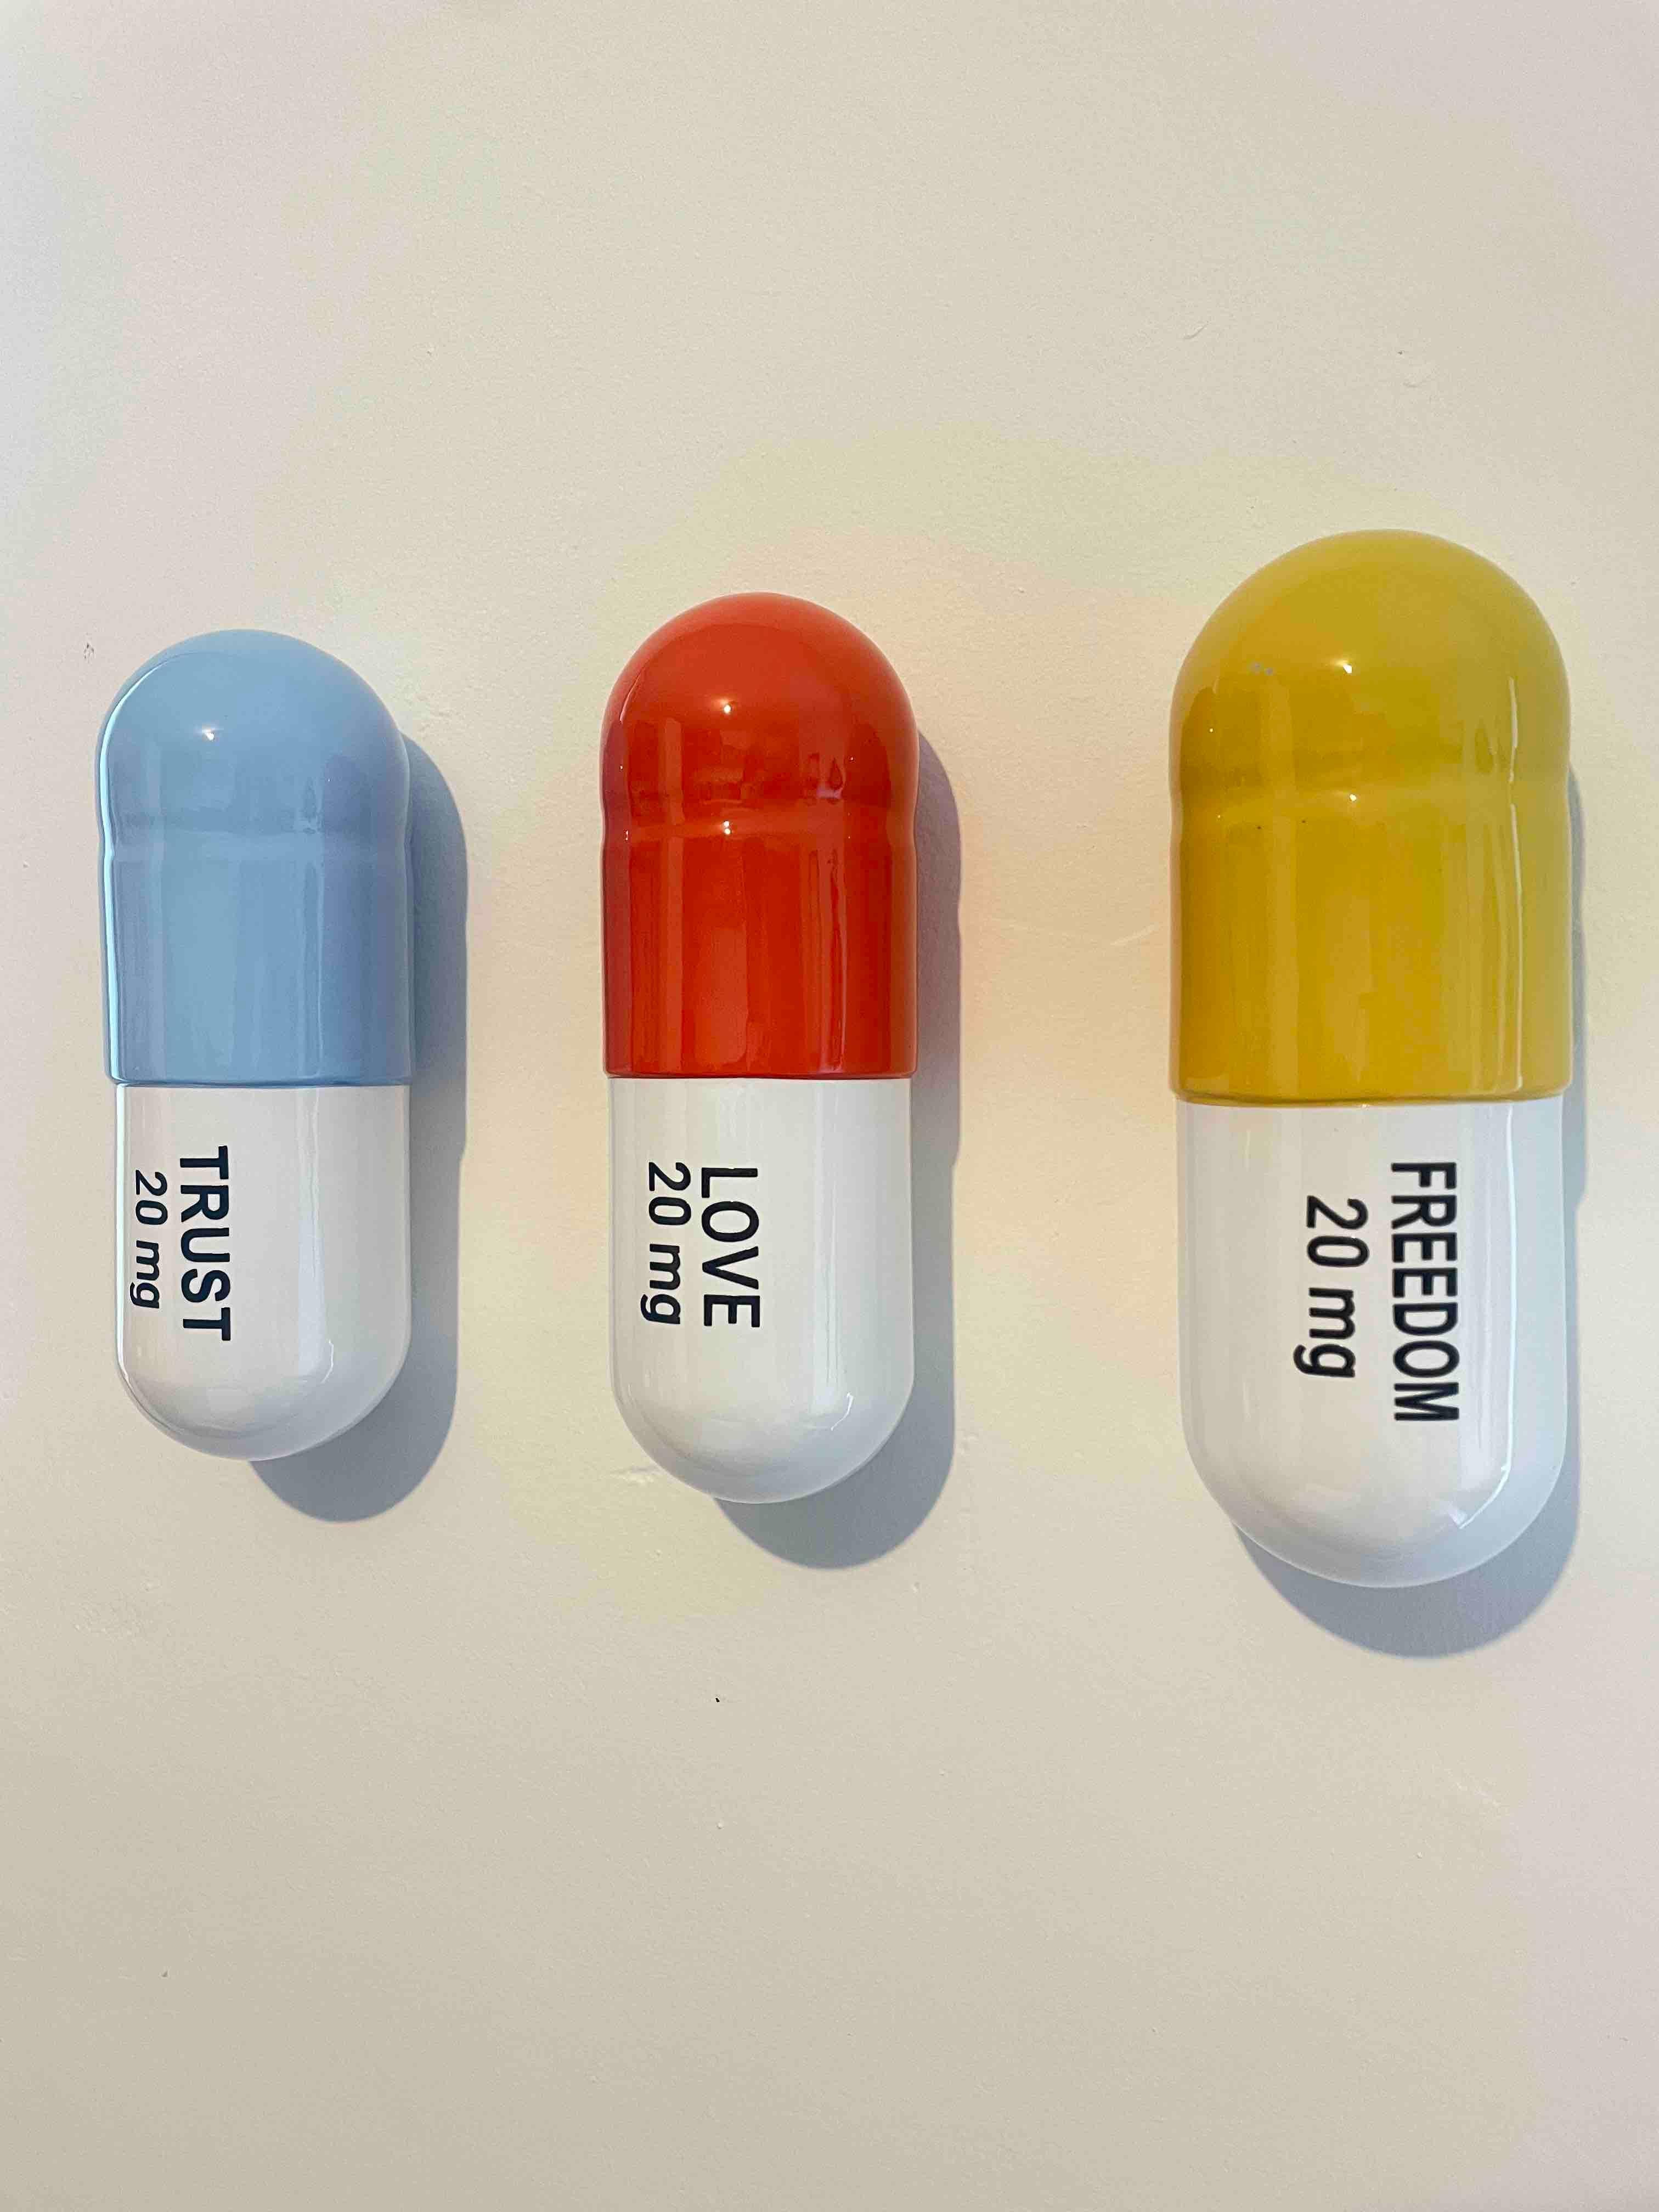 20 MG Trust, Love, Freedom pill Combo (turquoise, orange, yellow) - Pop Art Sculpture by Tal Nehoray